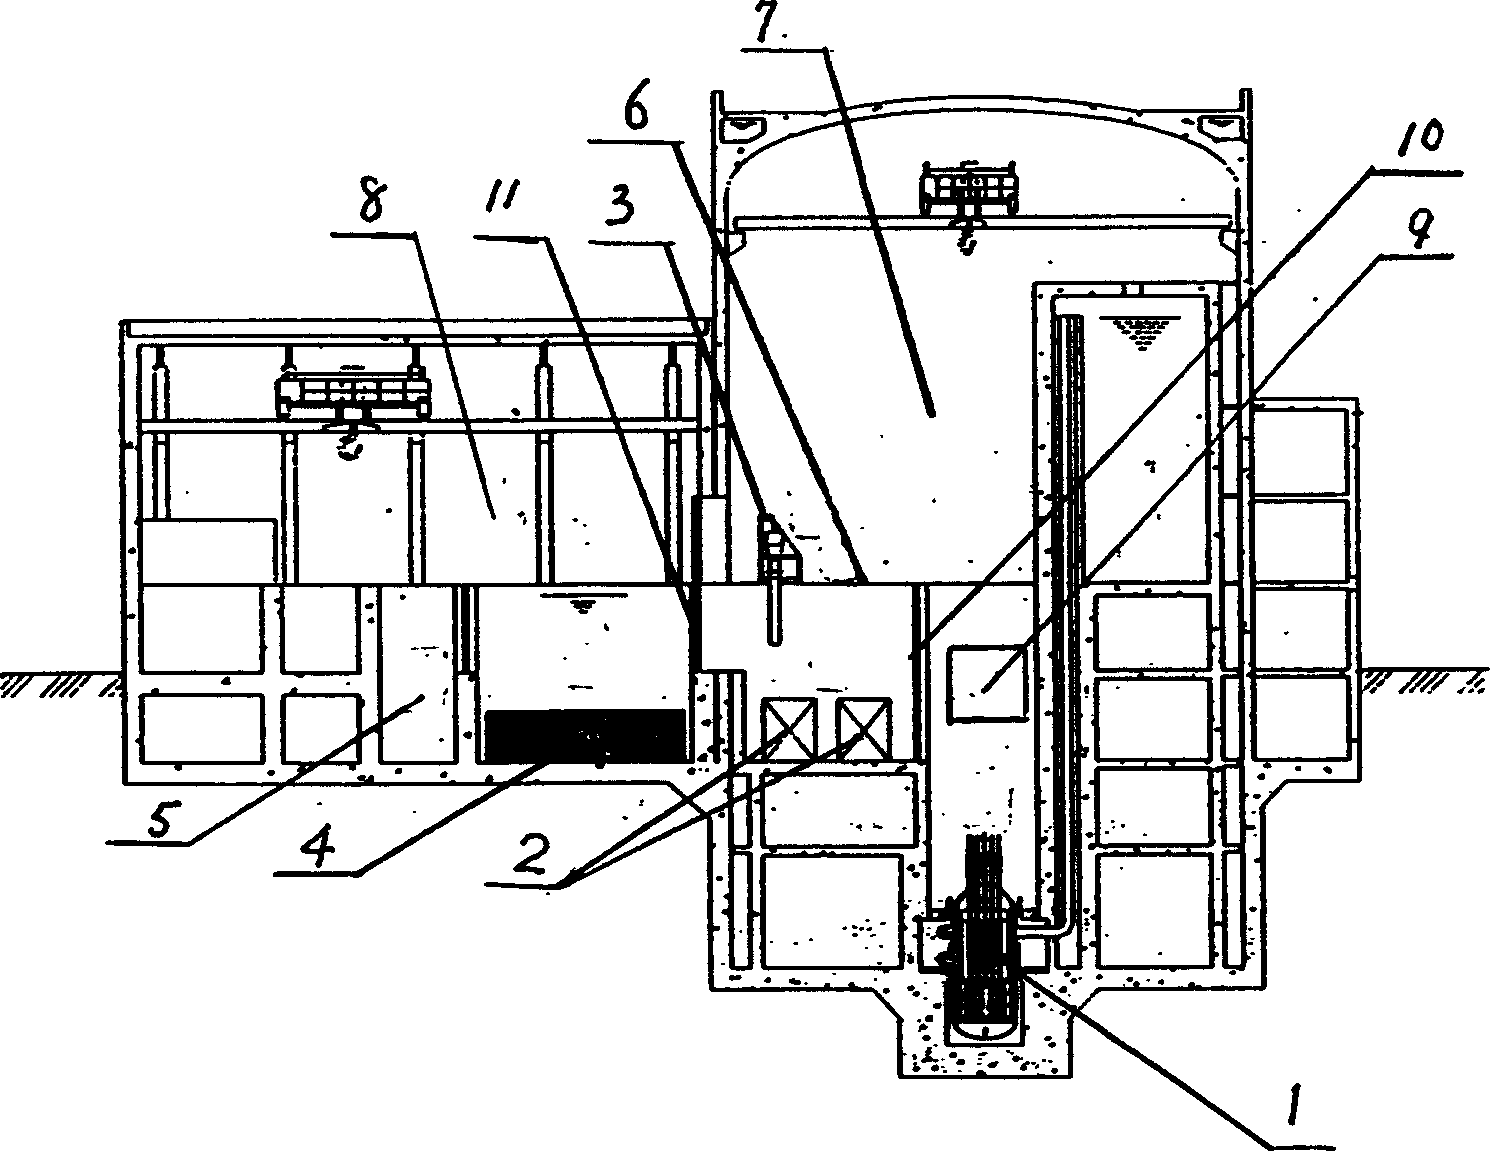 Straight nuclear reactor fuel assembly refueling, loading and unloading technique